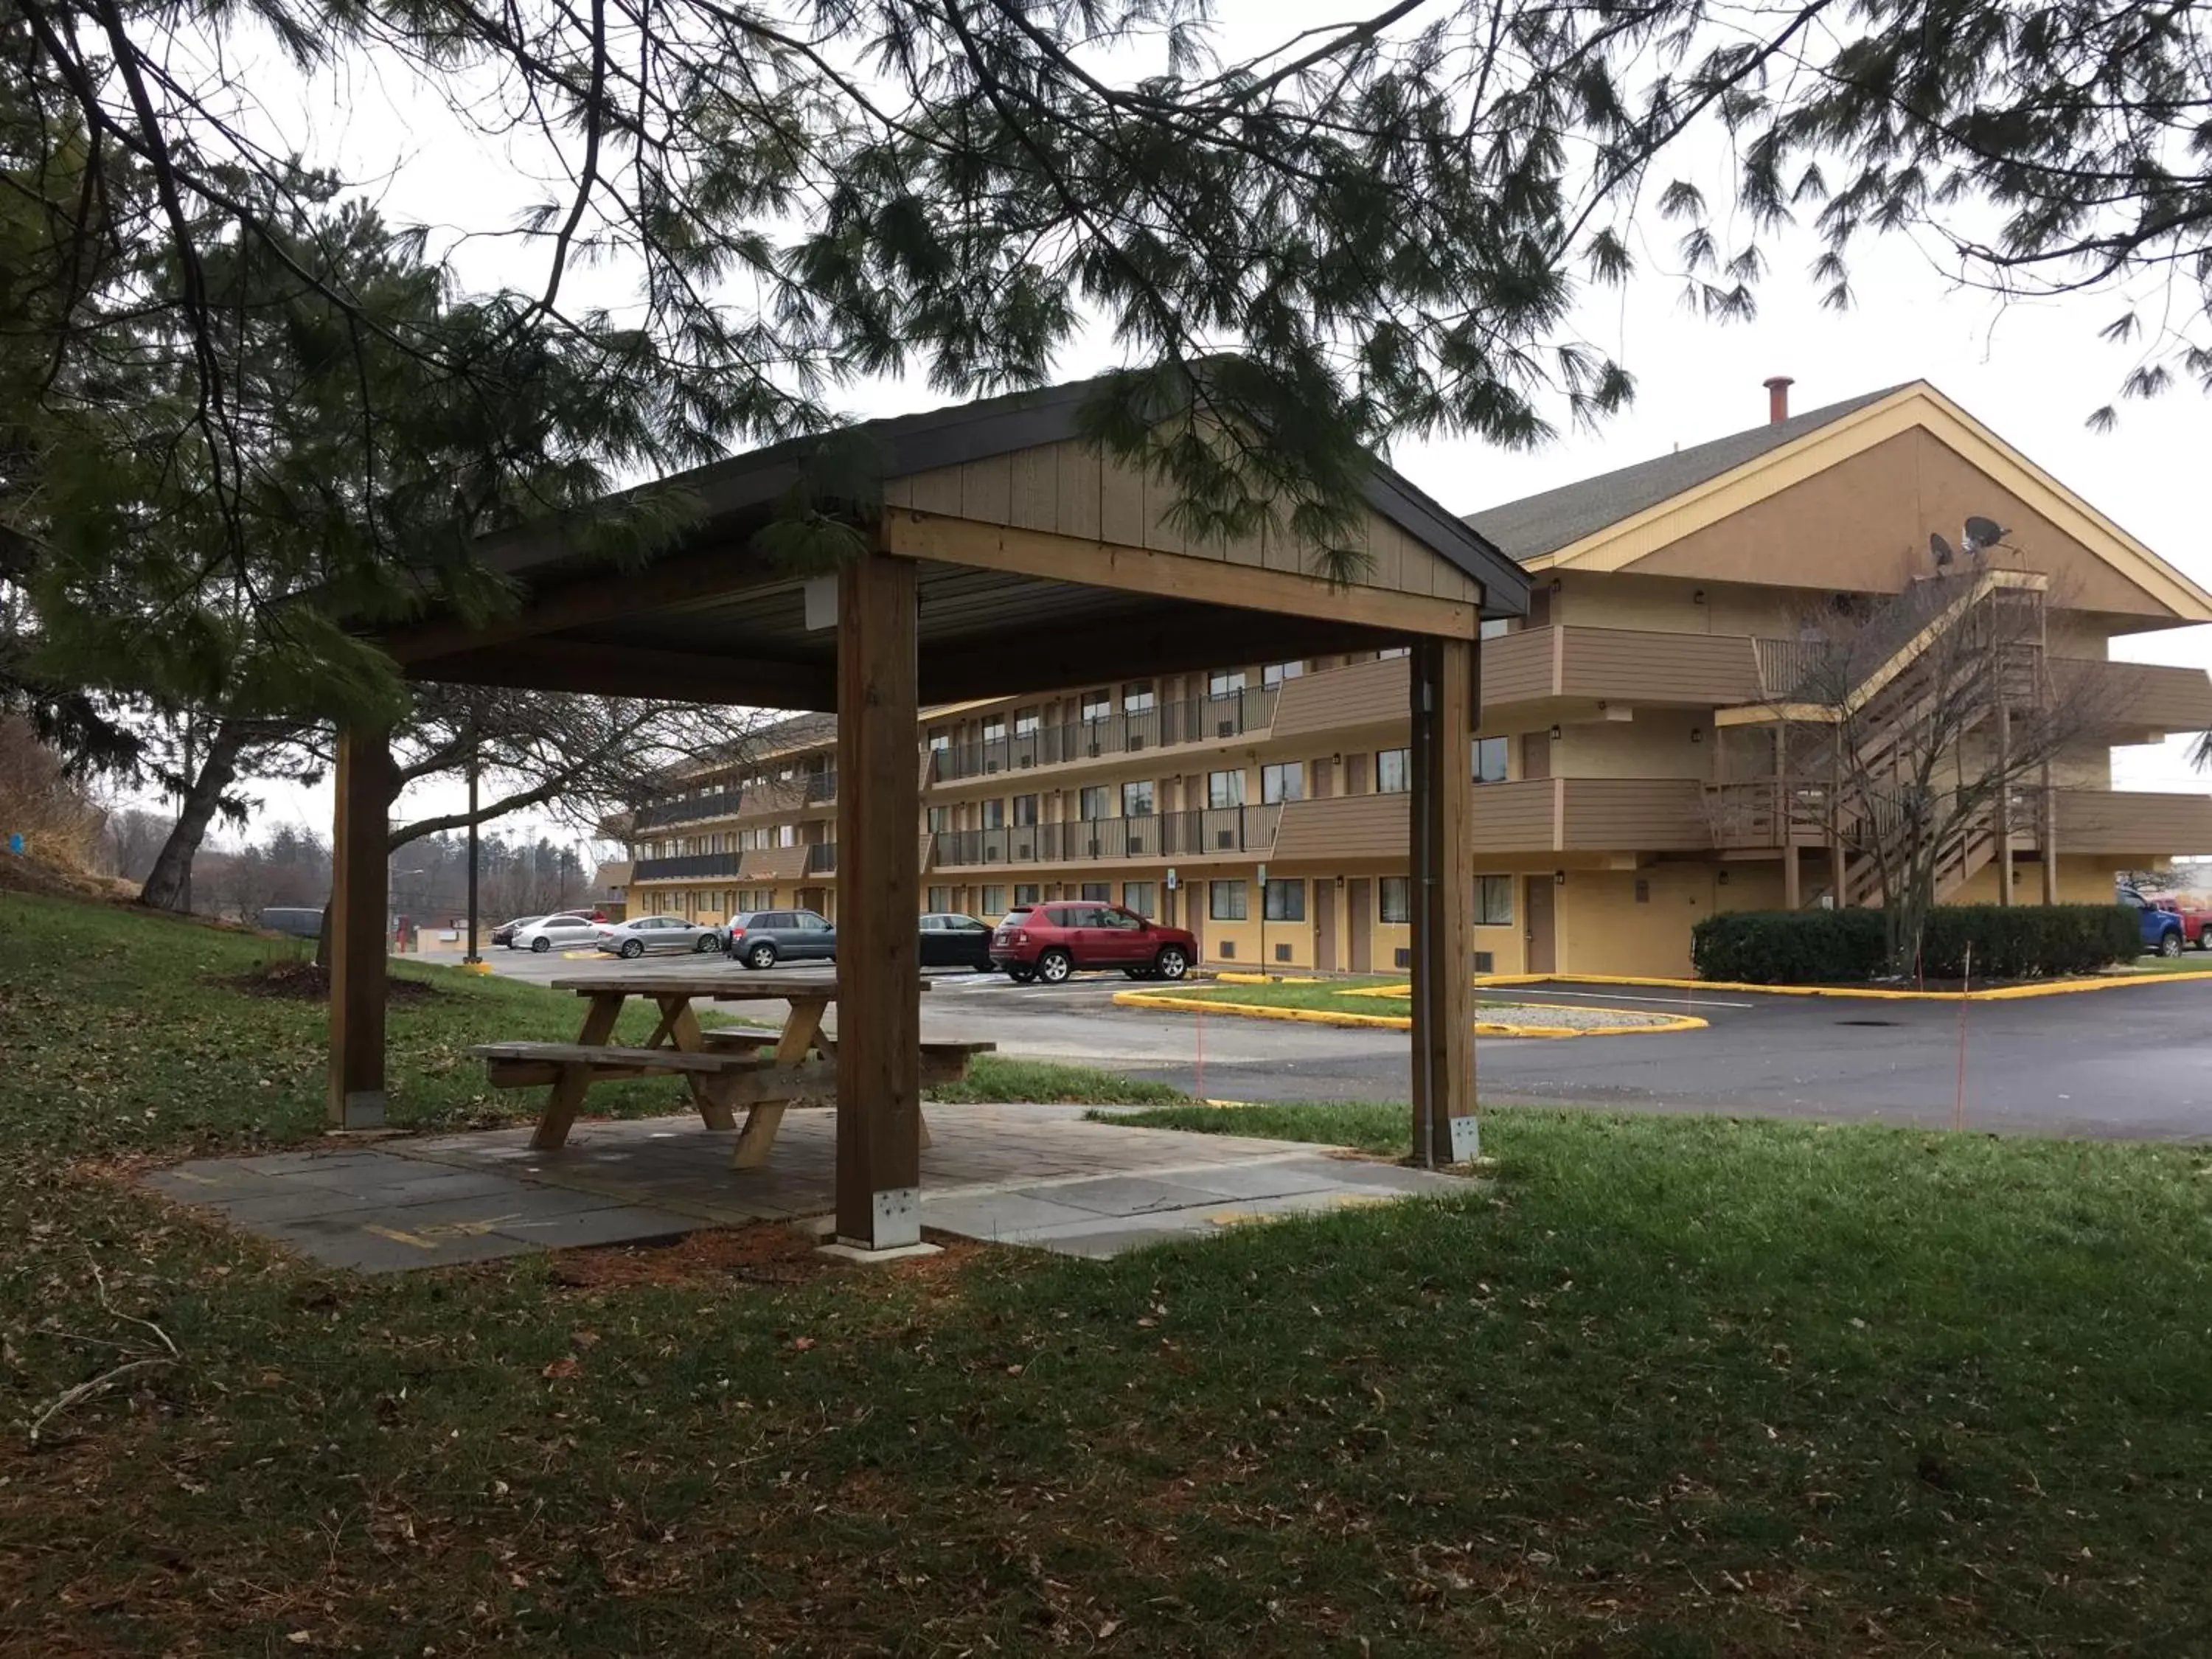 Property Building in Americas Best Value Inn-Pittsburgh Airport